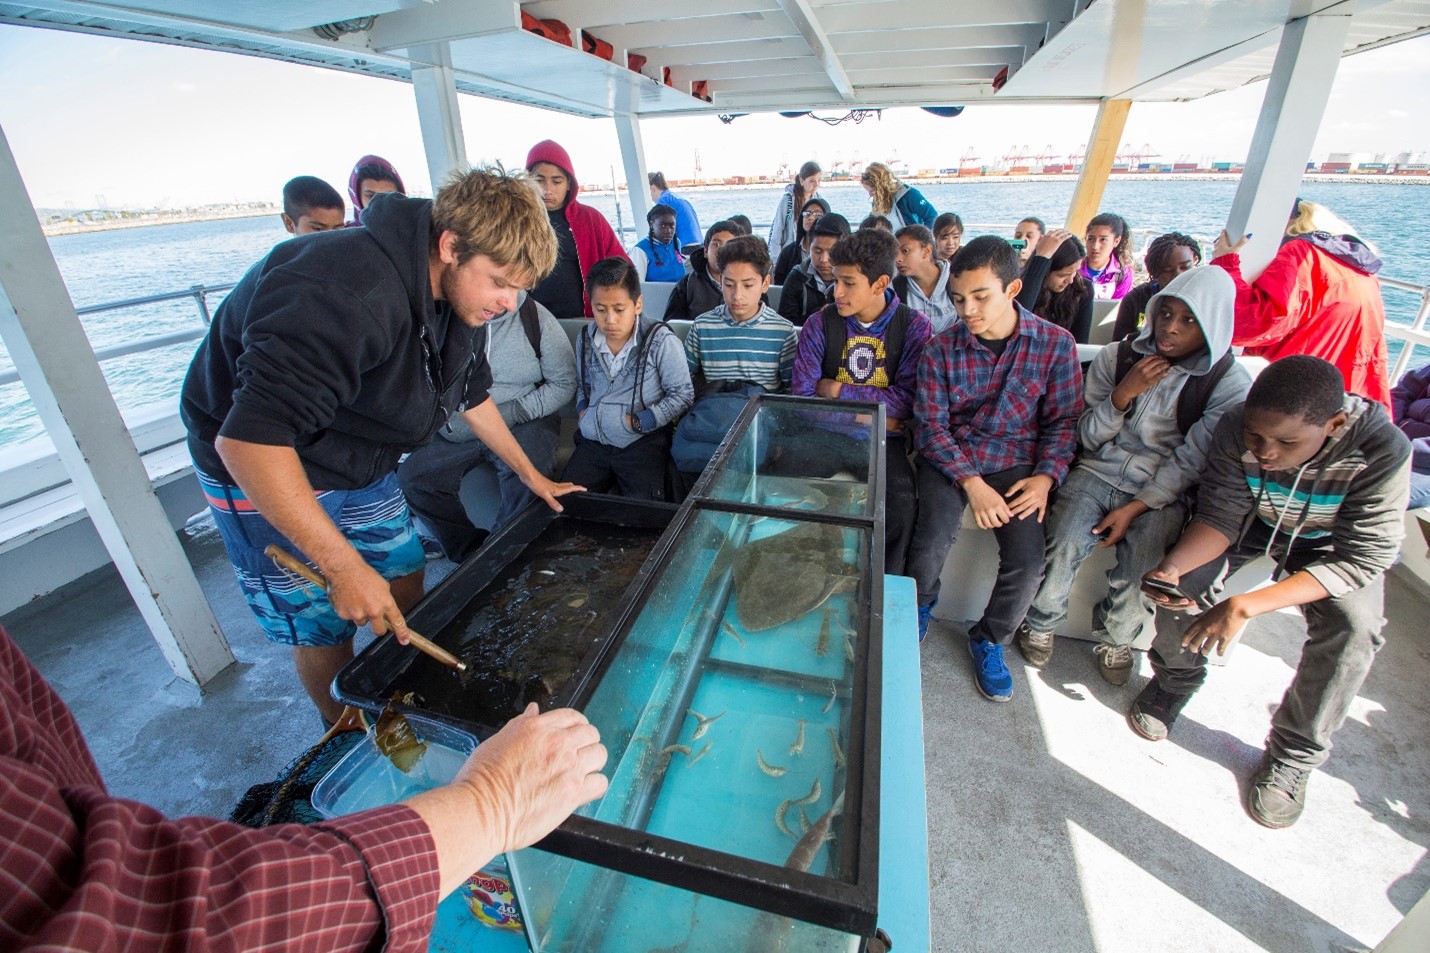 STUDENTS ABOARD THE 'THINK WATERSHED' FLOATING MARINE LAB